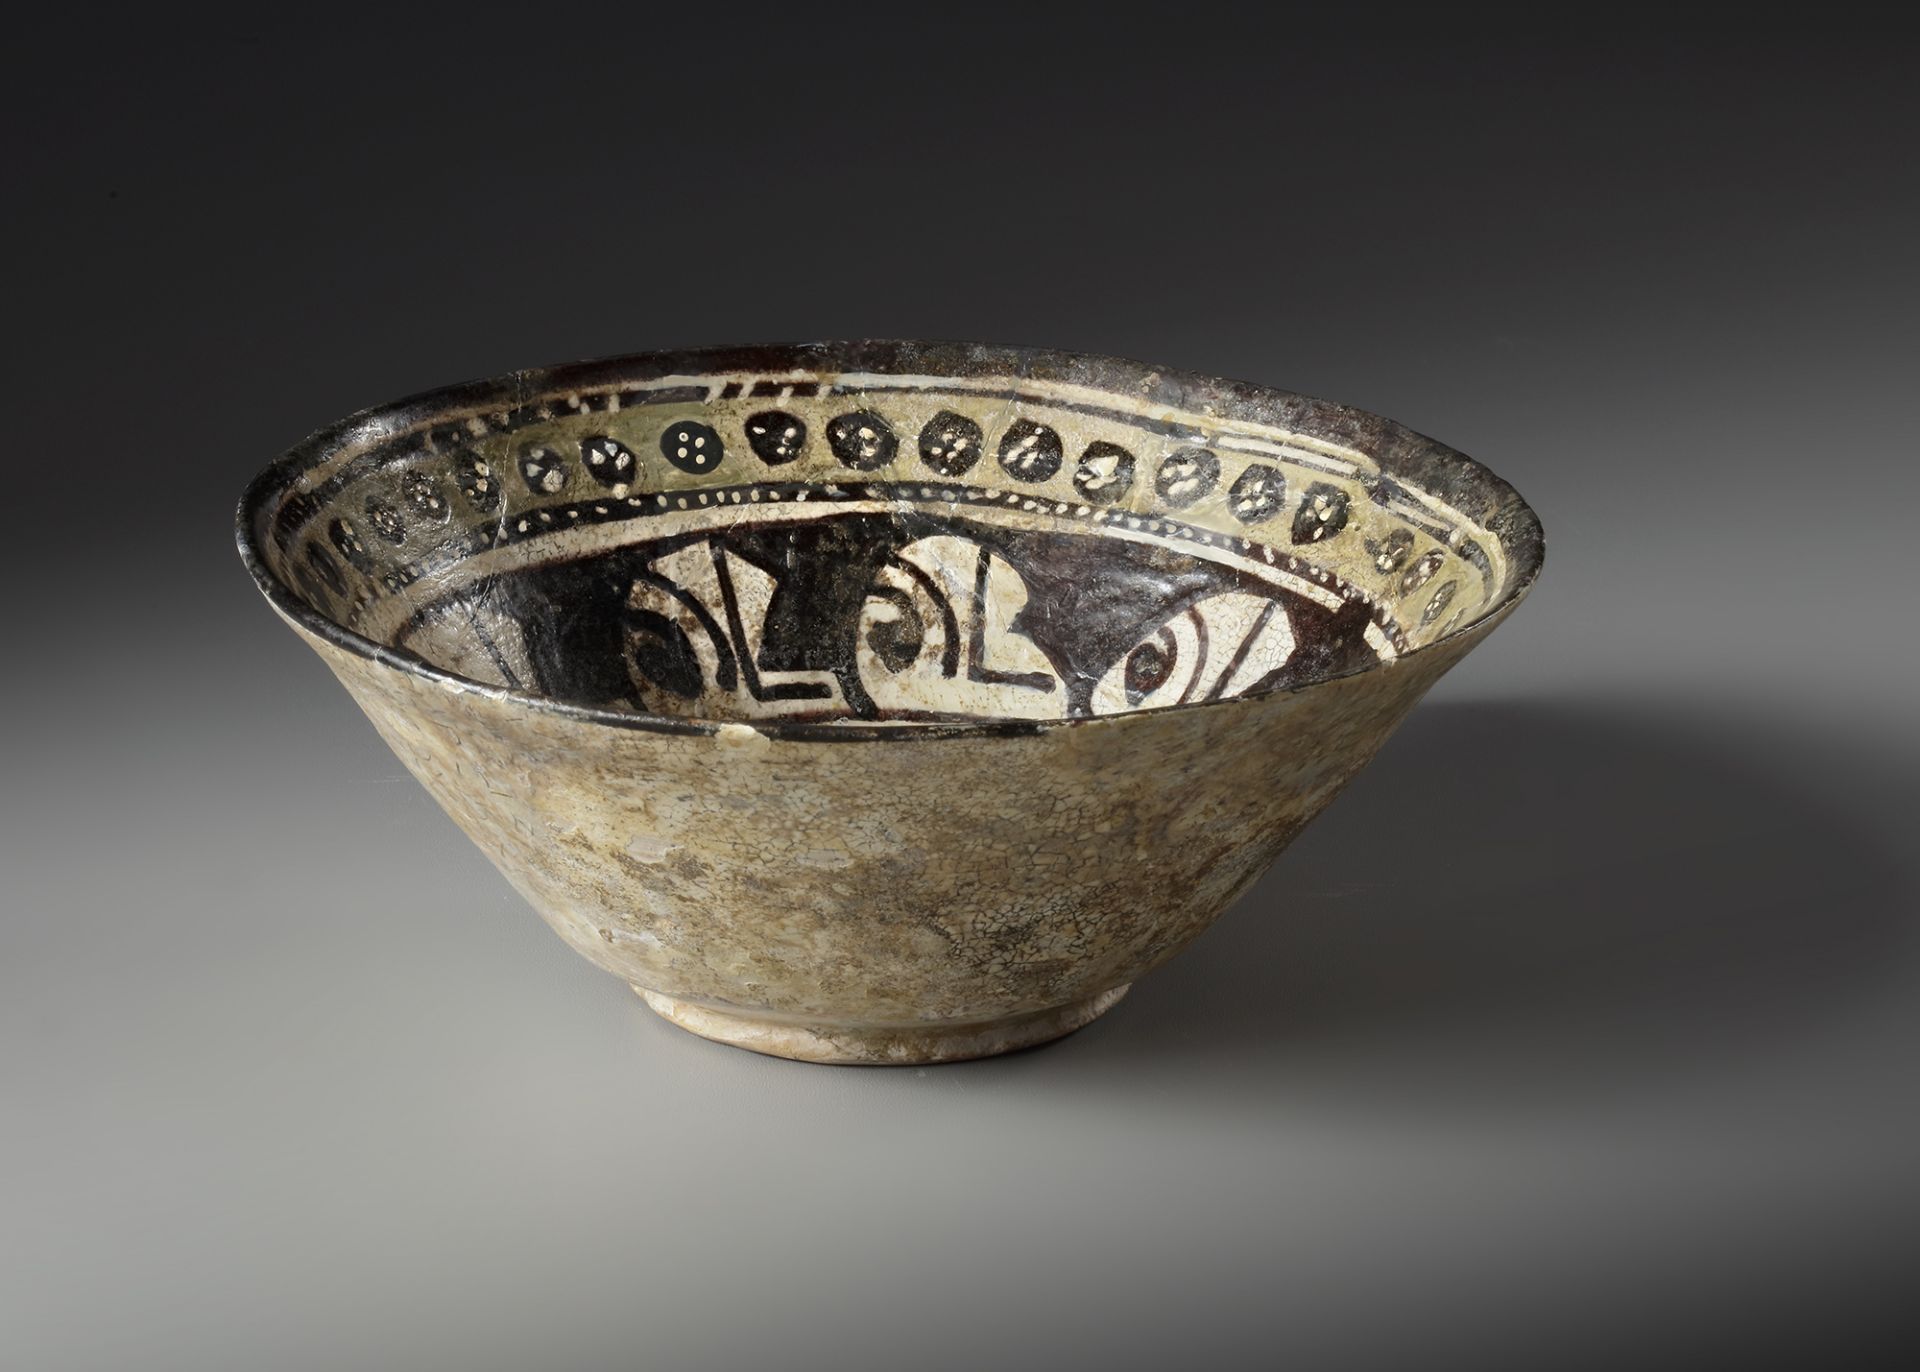 A NISHAPUR CONICAL POTTERY BOWL, PERSIA, LATE 9TH-EARLY 10TH CENTURY - Image 3 of 4